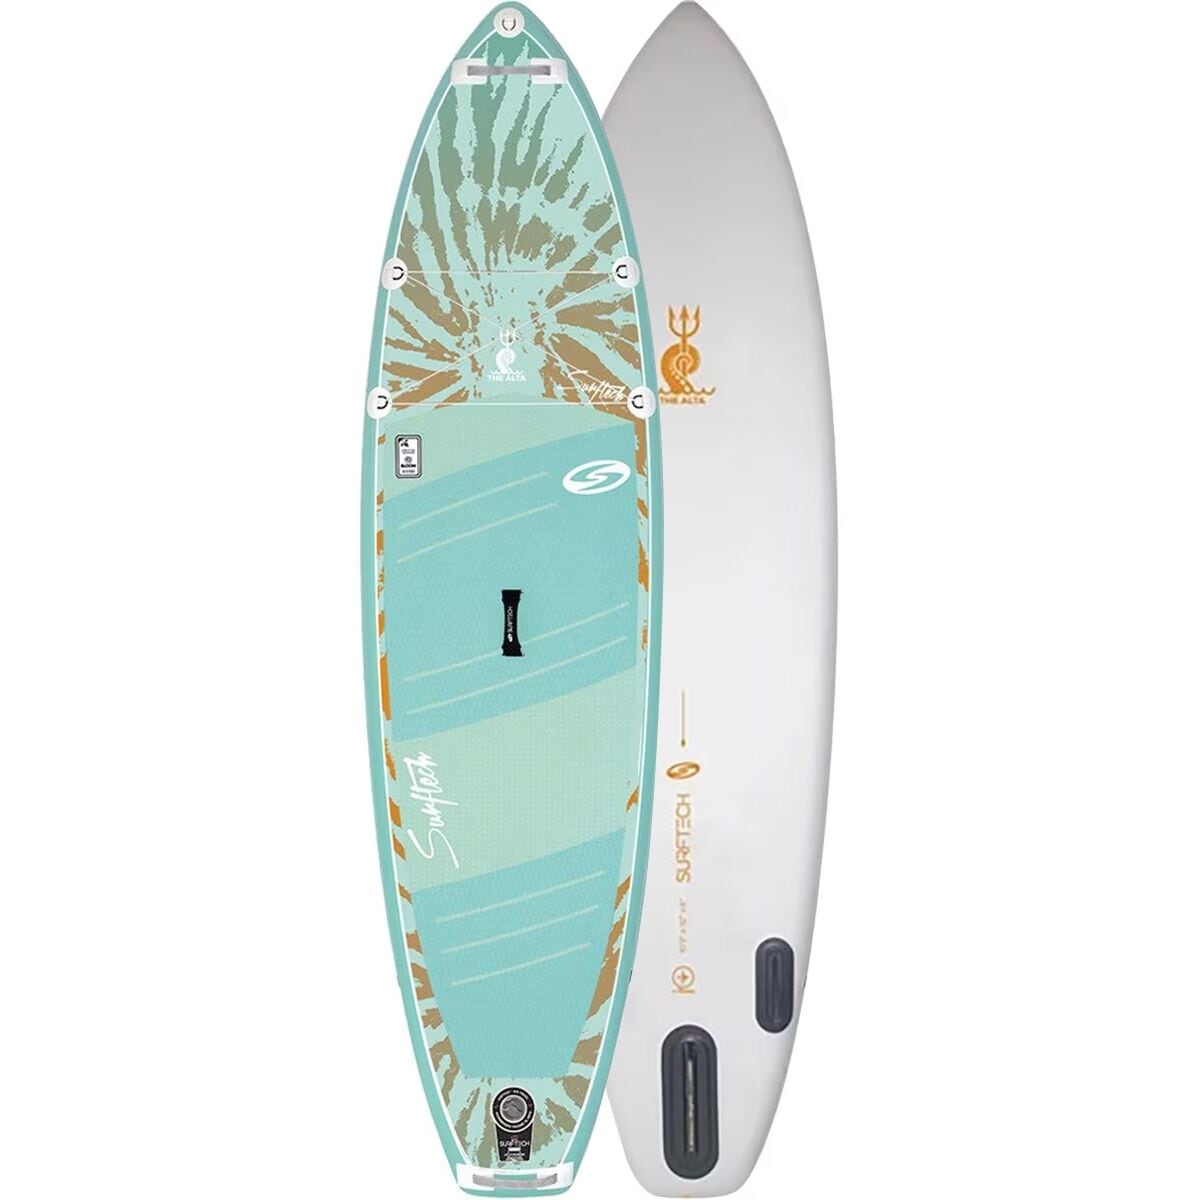 Surftech x Prana Air Travel Alta Inflatable Stand-Up Paddleboard